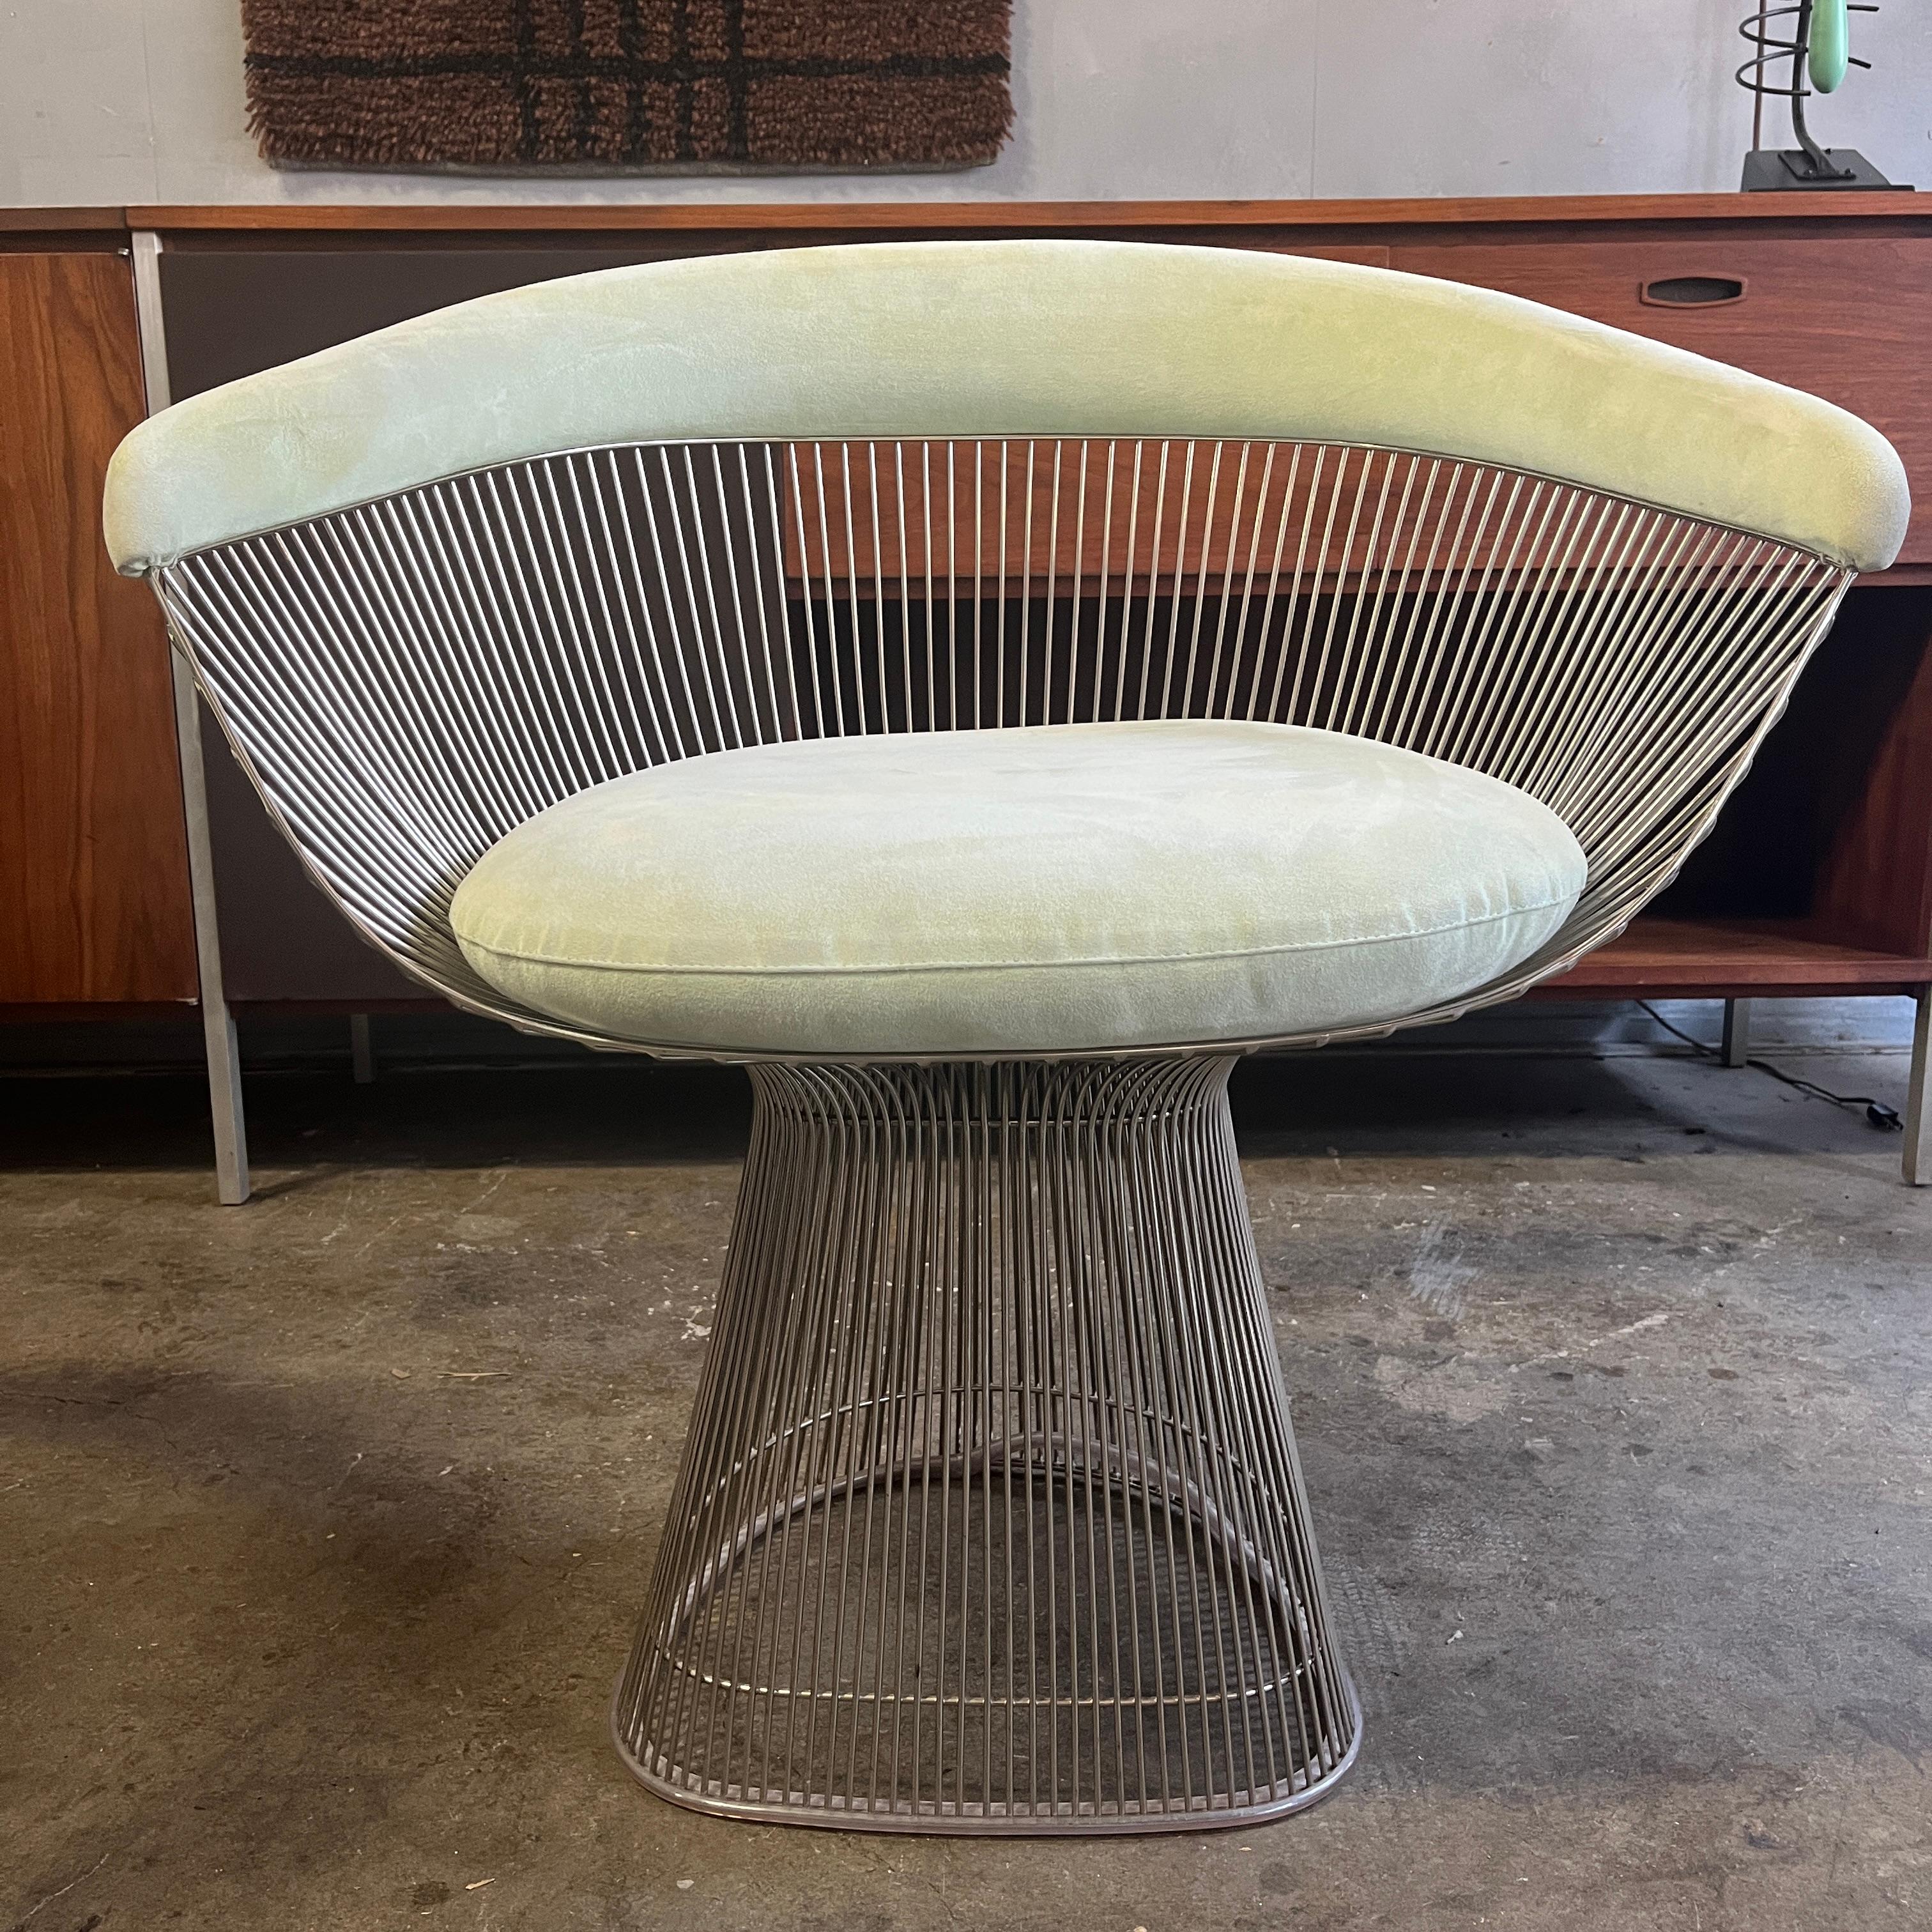 Set of 4 Mid-century Modern Warren Platner Arm Chairs with Nickel finish for Knoll. Recent production. 
Showing no rust or tarnish to wire frames. Beautiful seafood green Upholstery. 
Ready for use. 

Please contact us for custom shipping quote. 